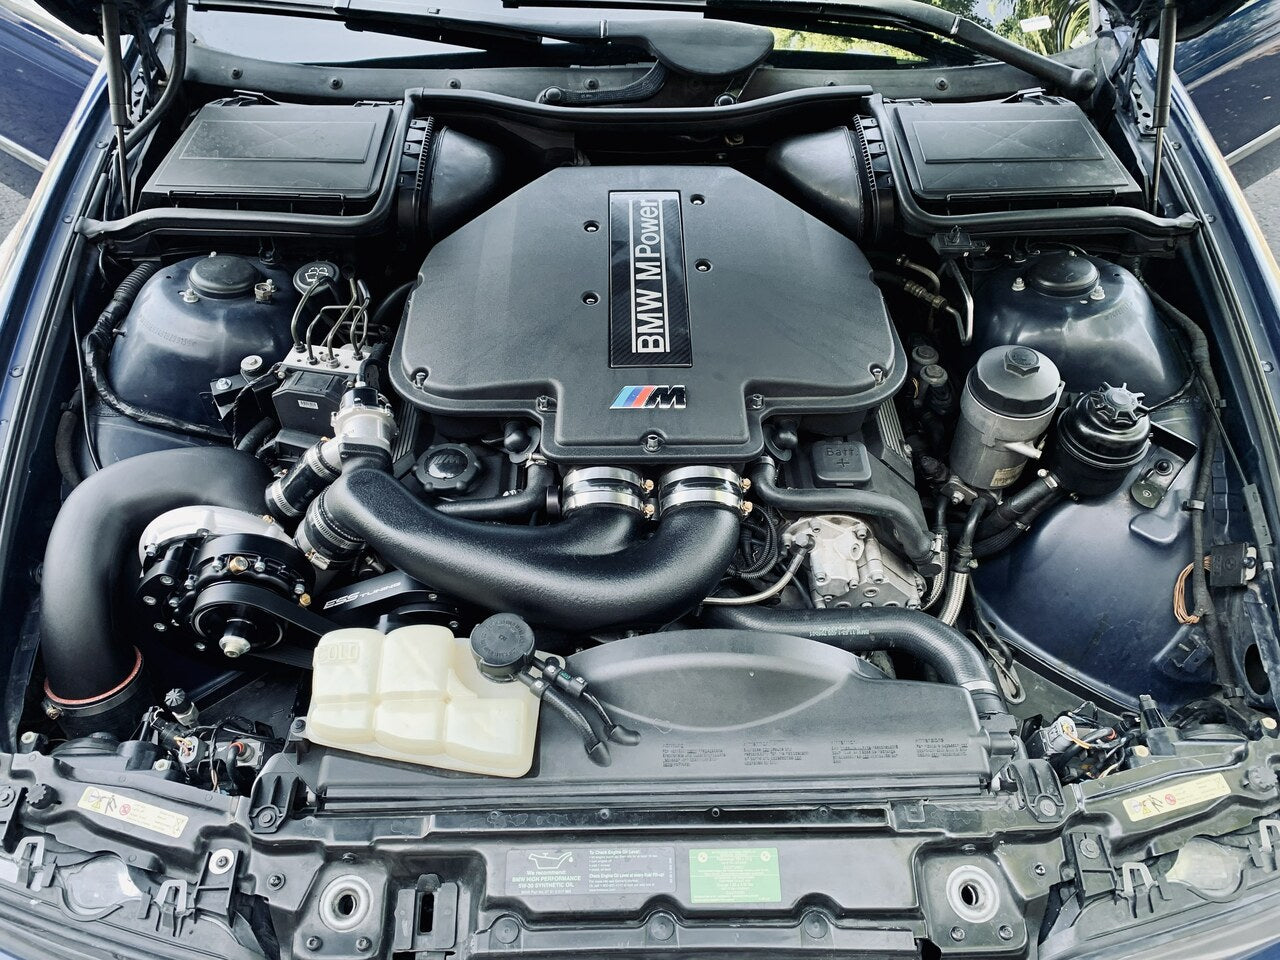 ESS Tuning - BMW E39 M5 G1 Supercharger System (ESS-S62G1)